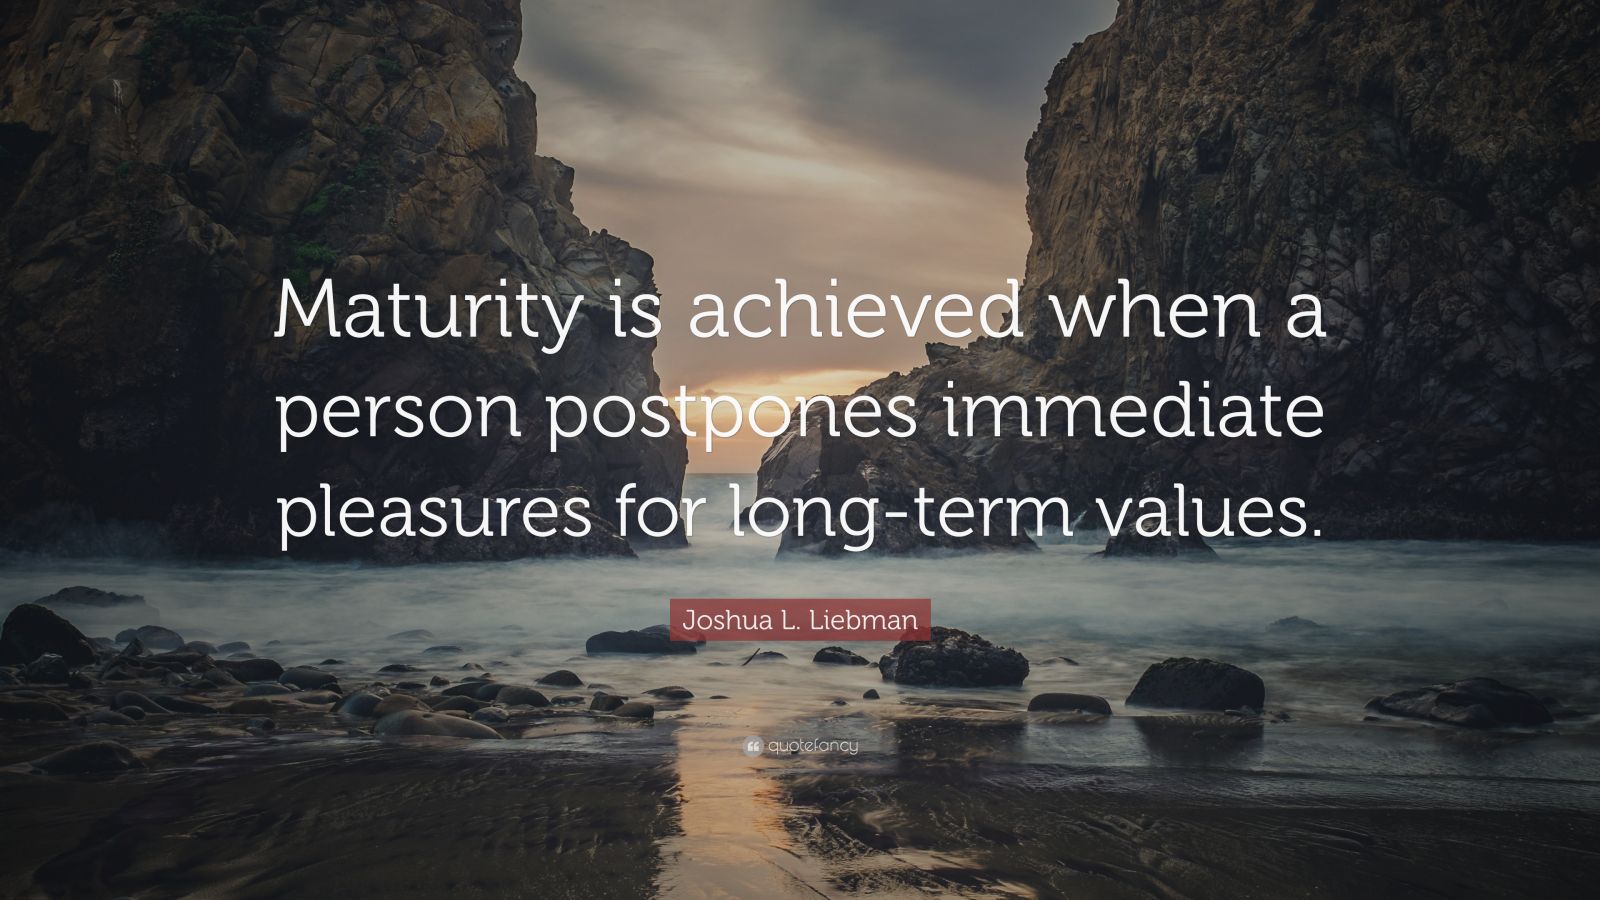 Joshua L. Liebman Quote: "Maturity is achieved when a ...